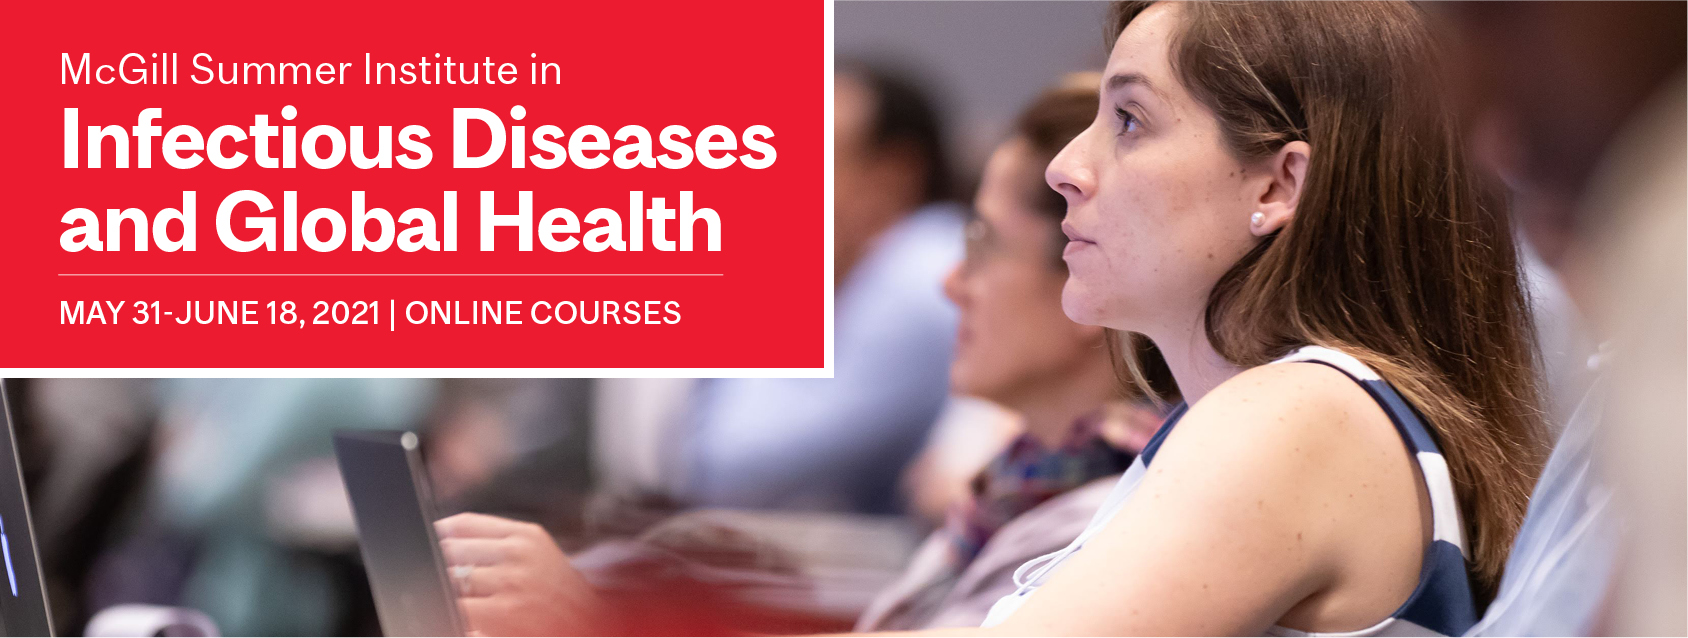 McGill Summer Institute in Infectious Diseases & Global Health Global